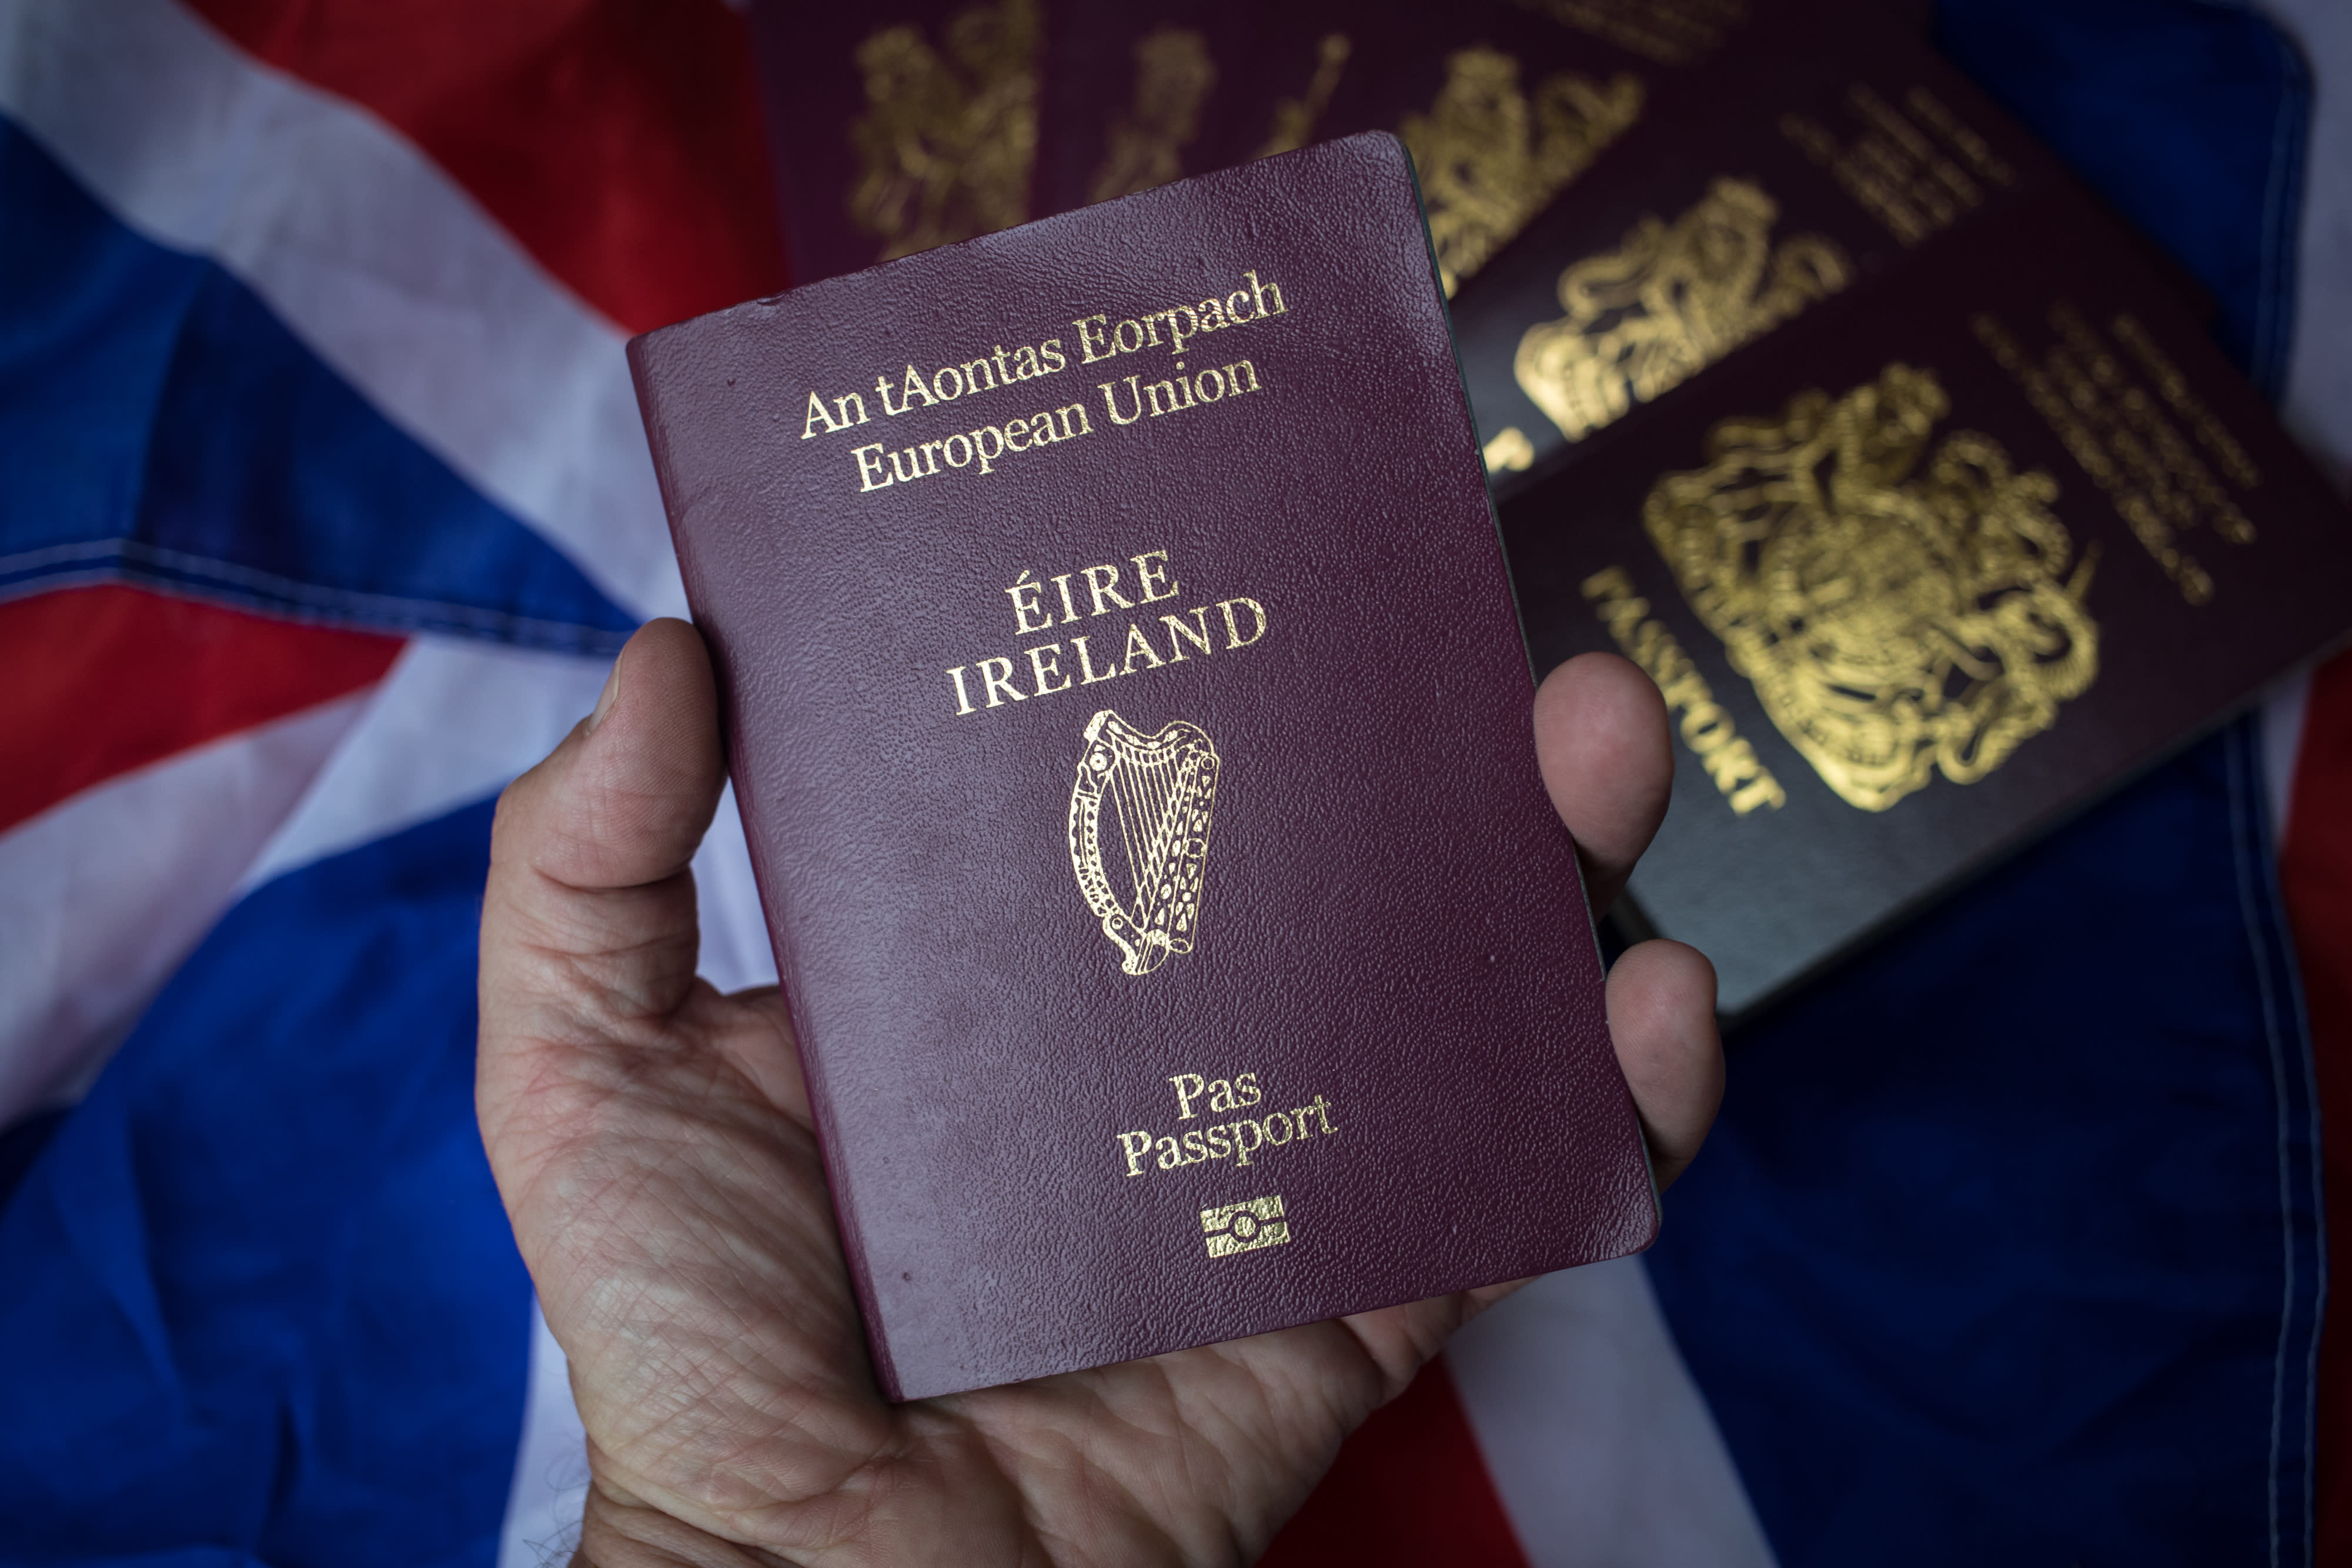 Record number of Irish passports issued to Brits in Brexit rush